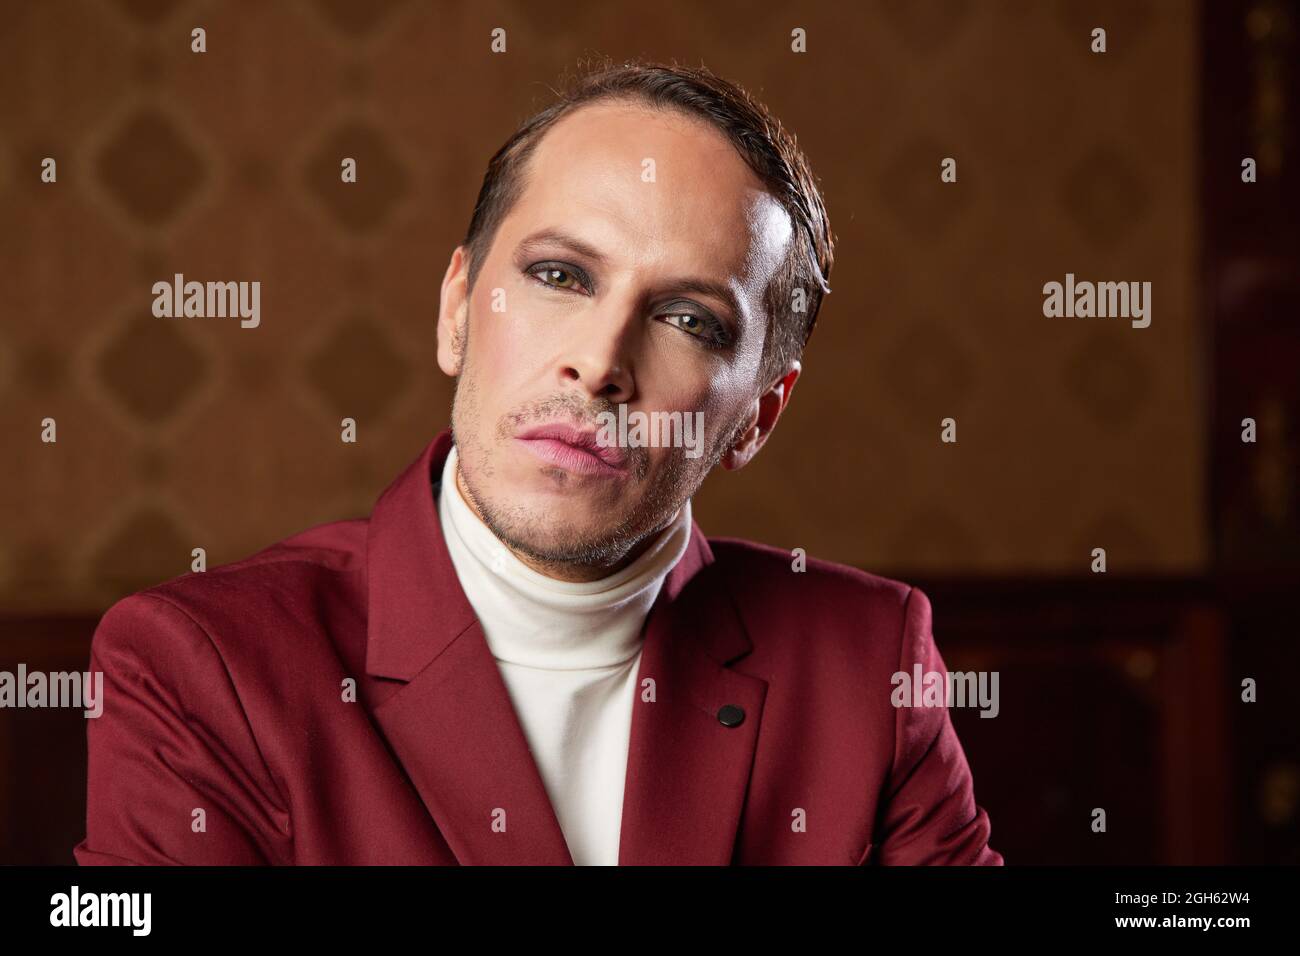 Serious pensive adult male theater artist with makeup and in elegant outfit looking at camera while thinking over decision Stock Photo